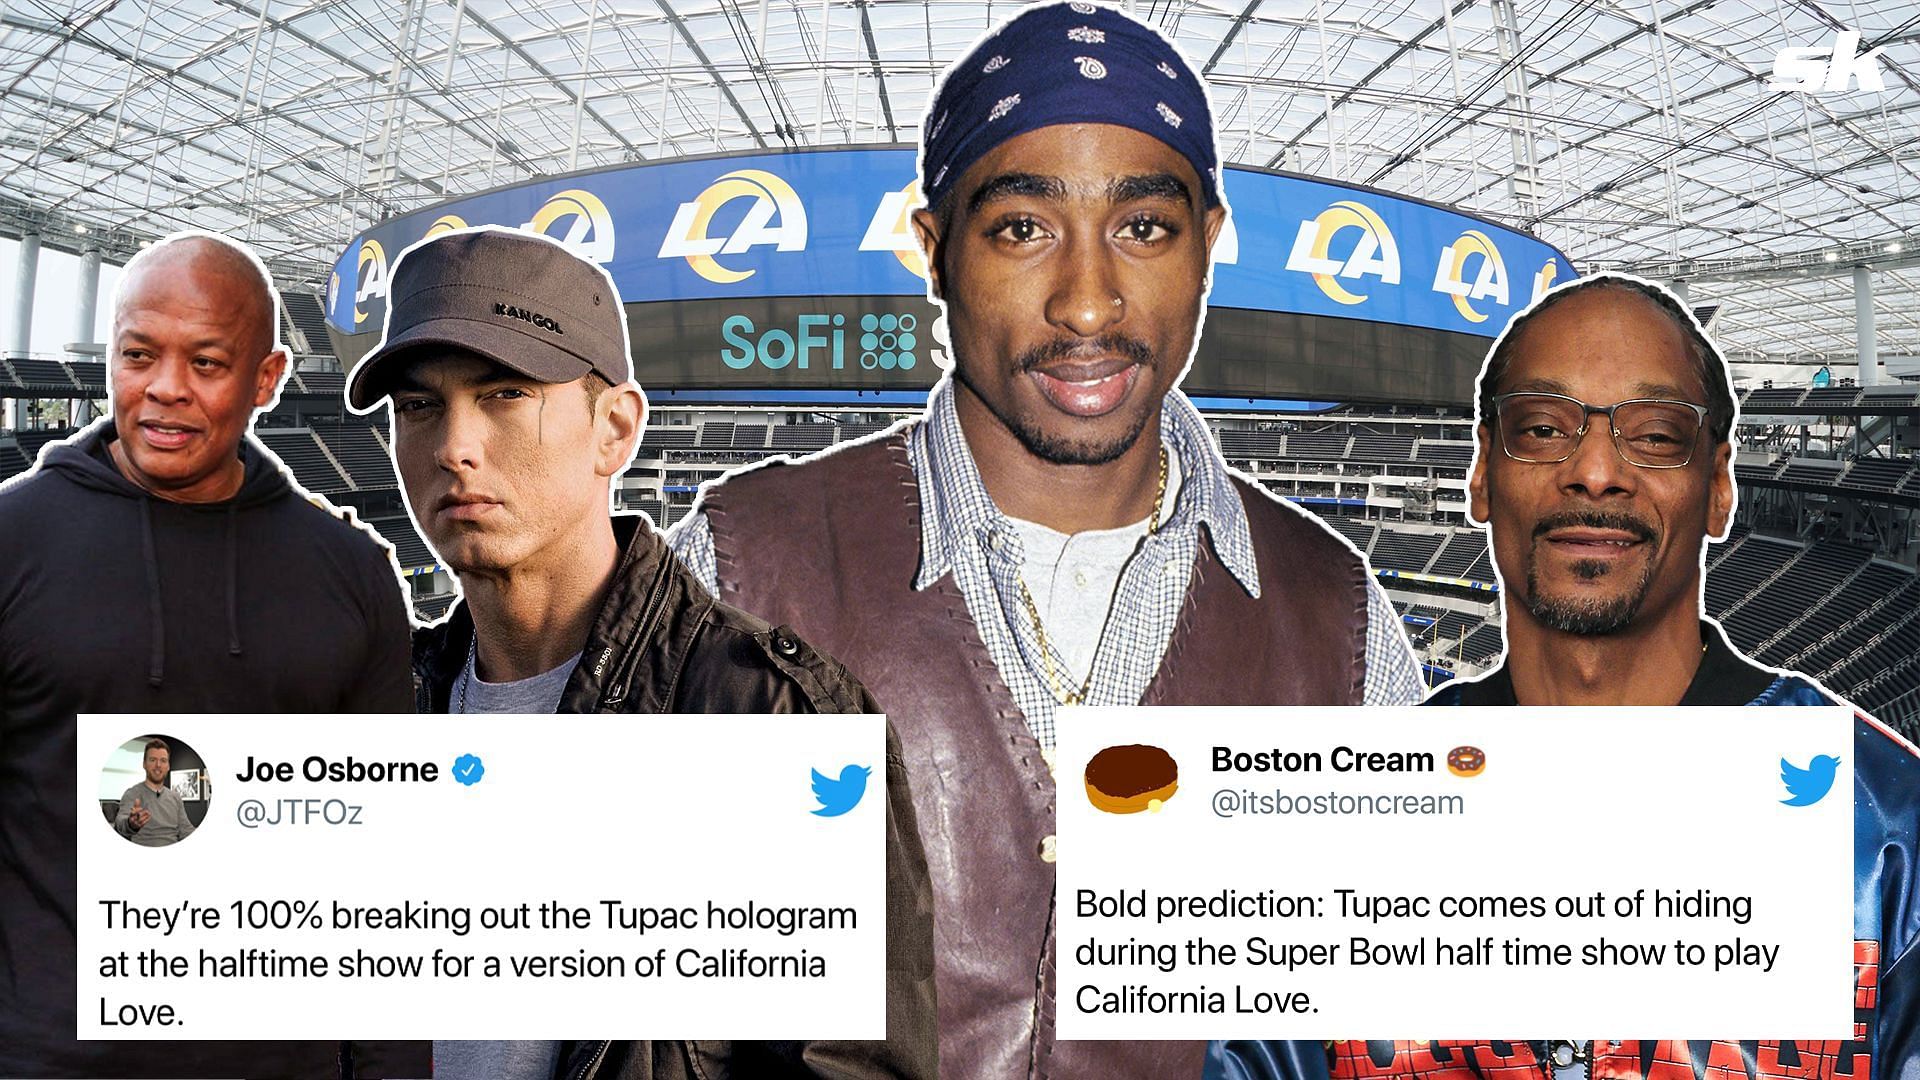 Tupac rumored to make an appearance during Super Bowl halftime show